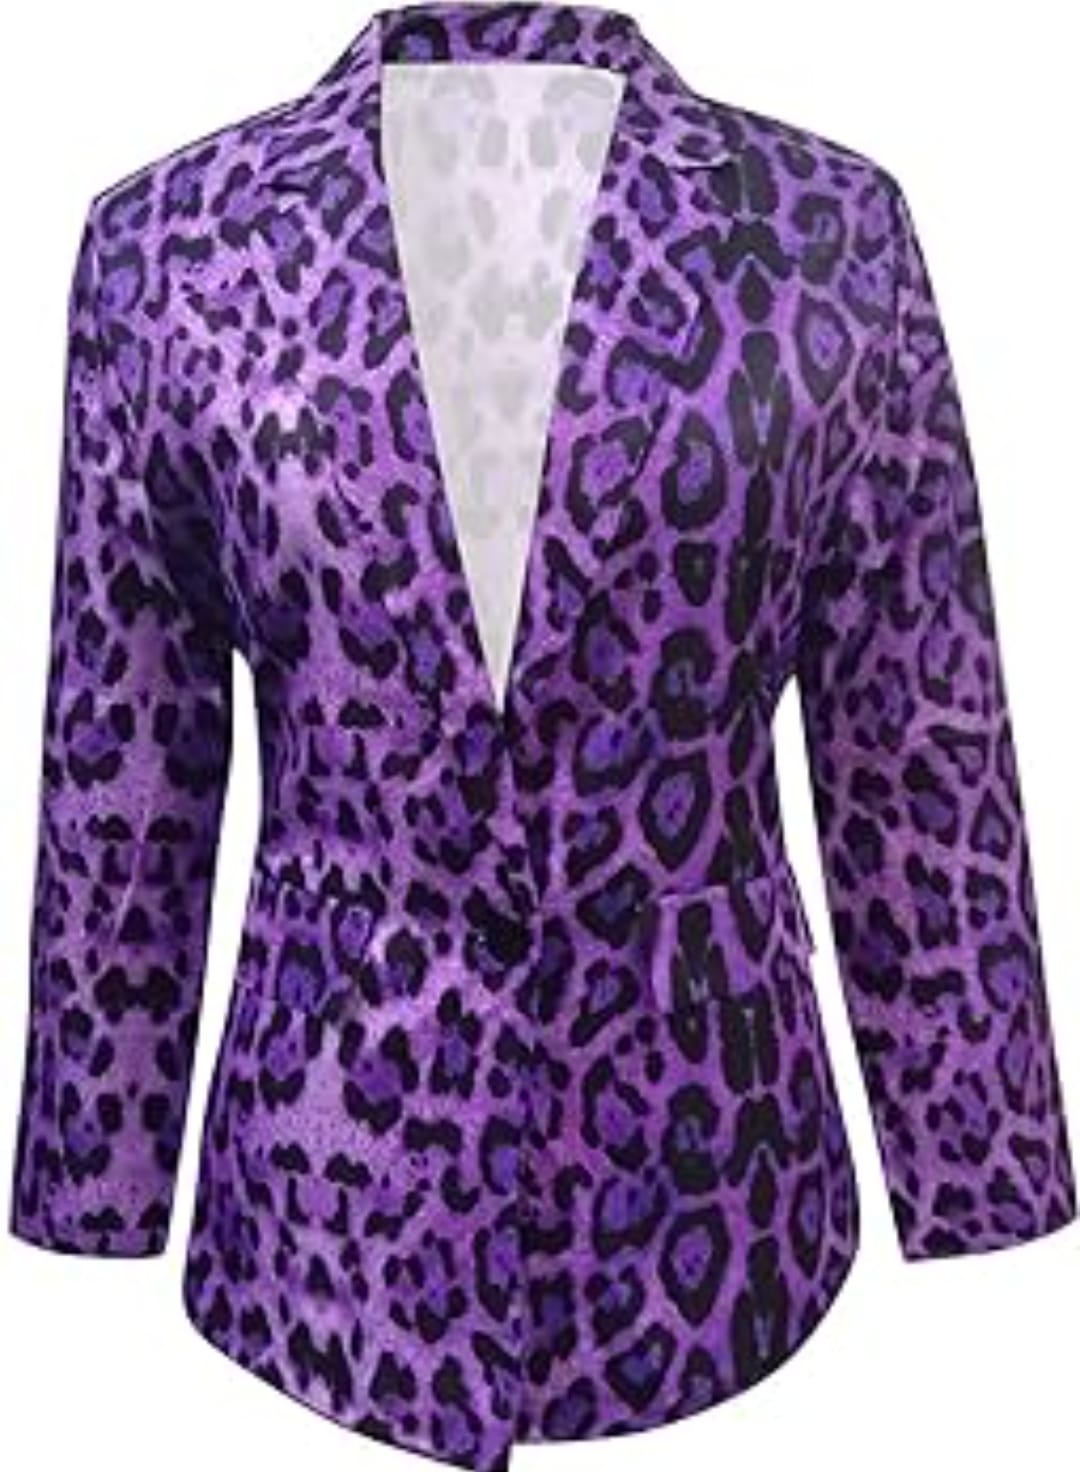 Women's Lined Lilac and Black Spotted Jacket